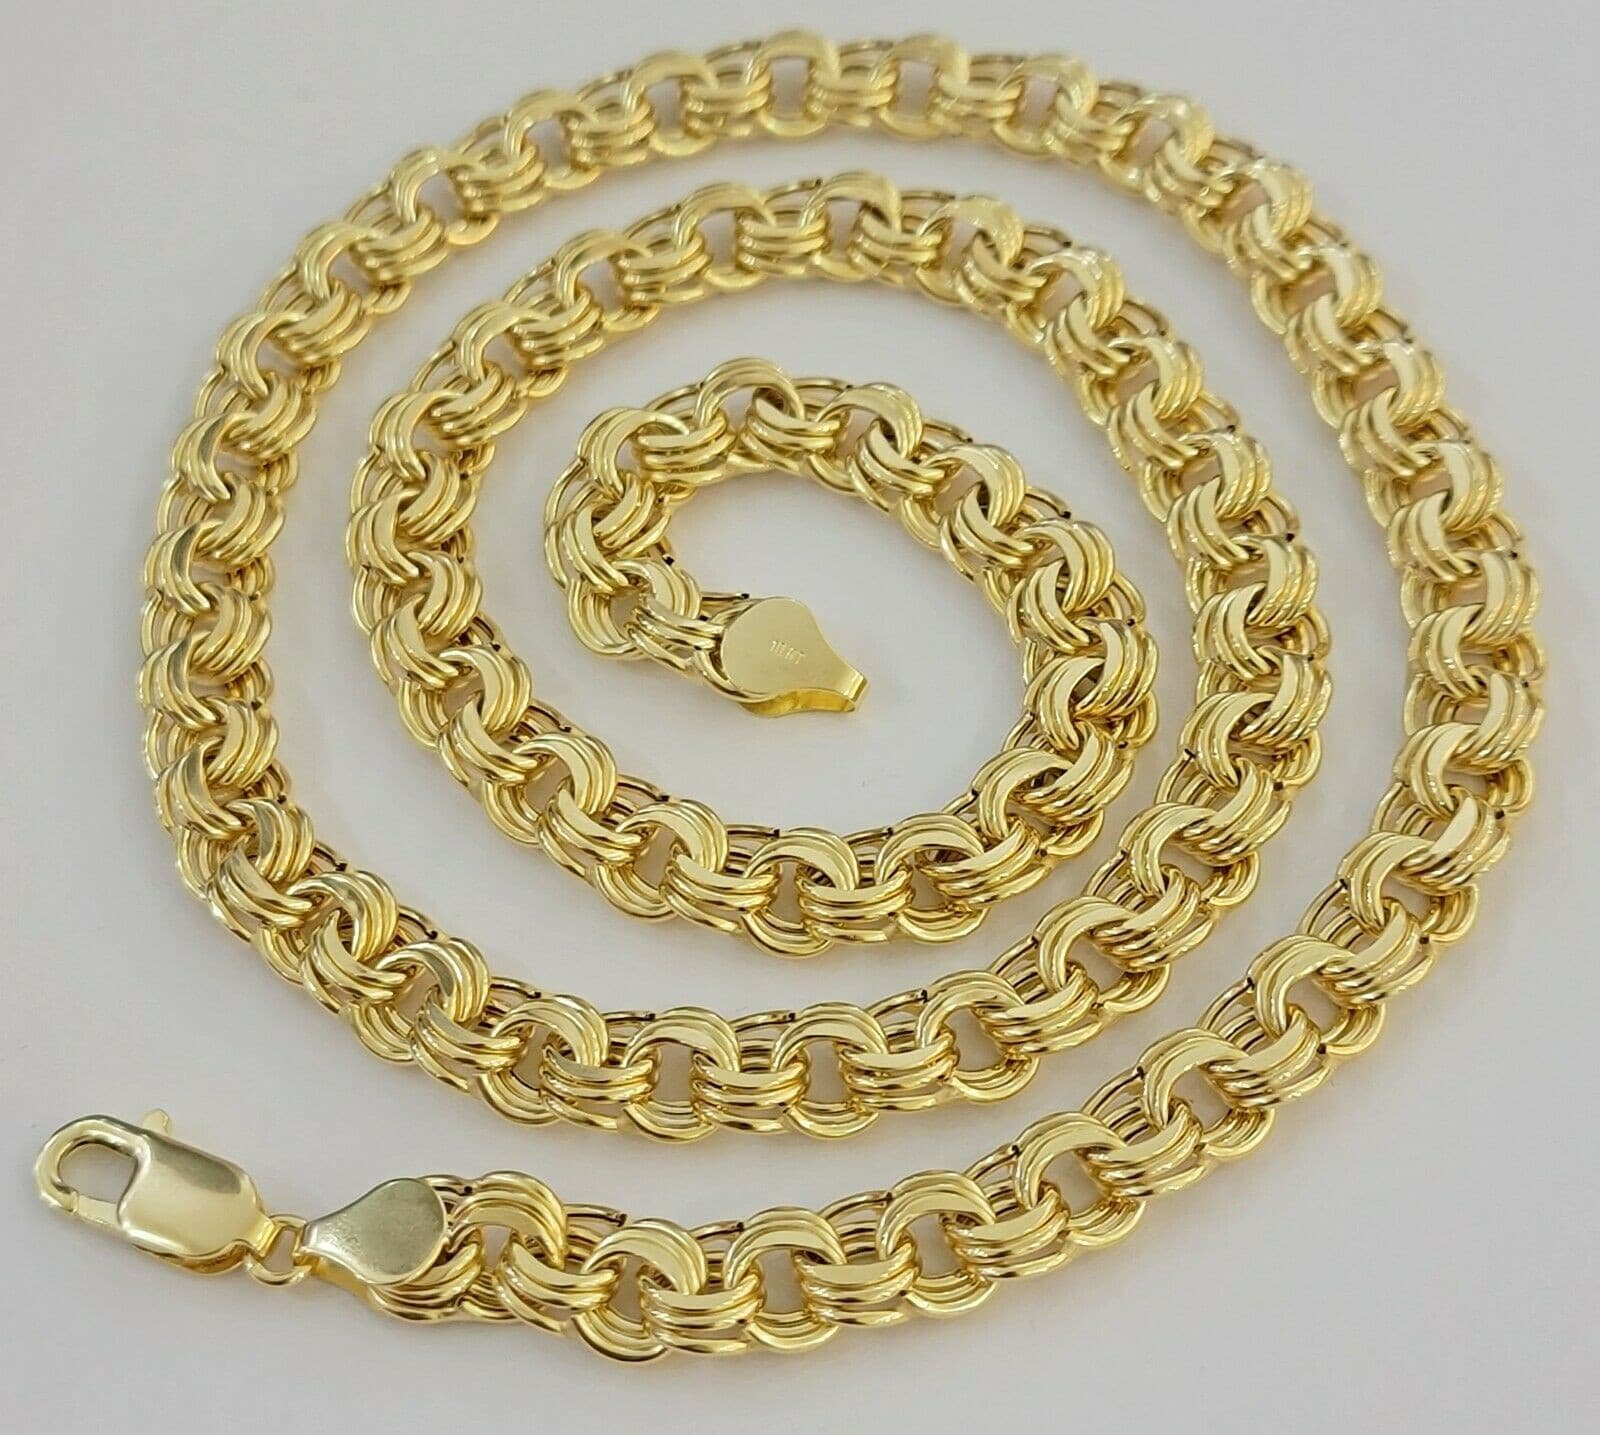 Mens Real Gold Necklace Chino Chain 10k Yellow Gold Chino 8mm 22" Lobster Clasp